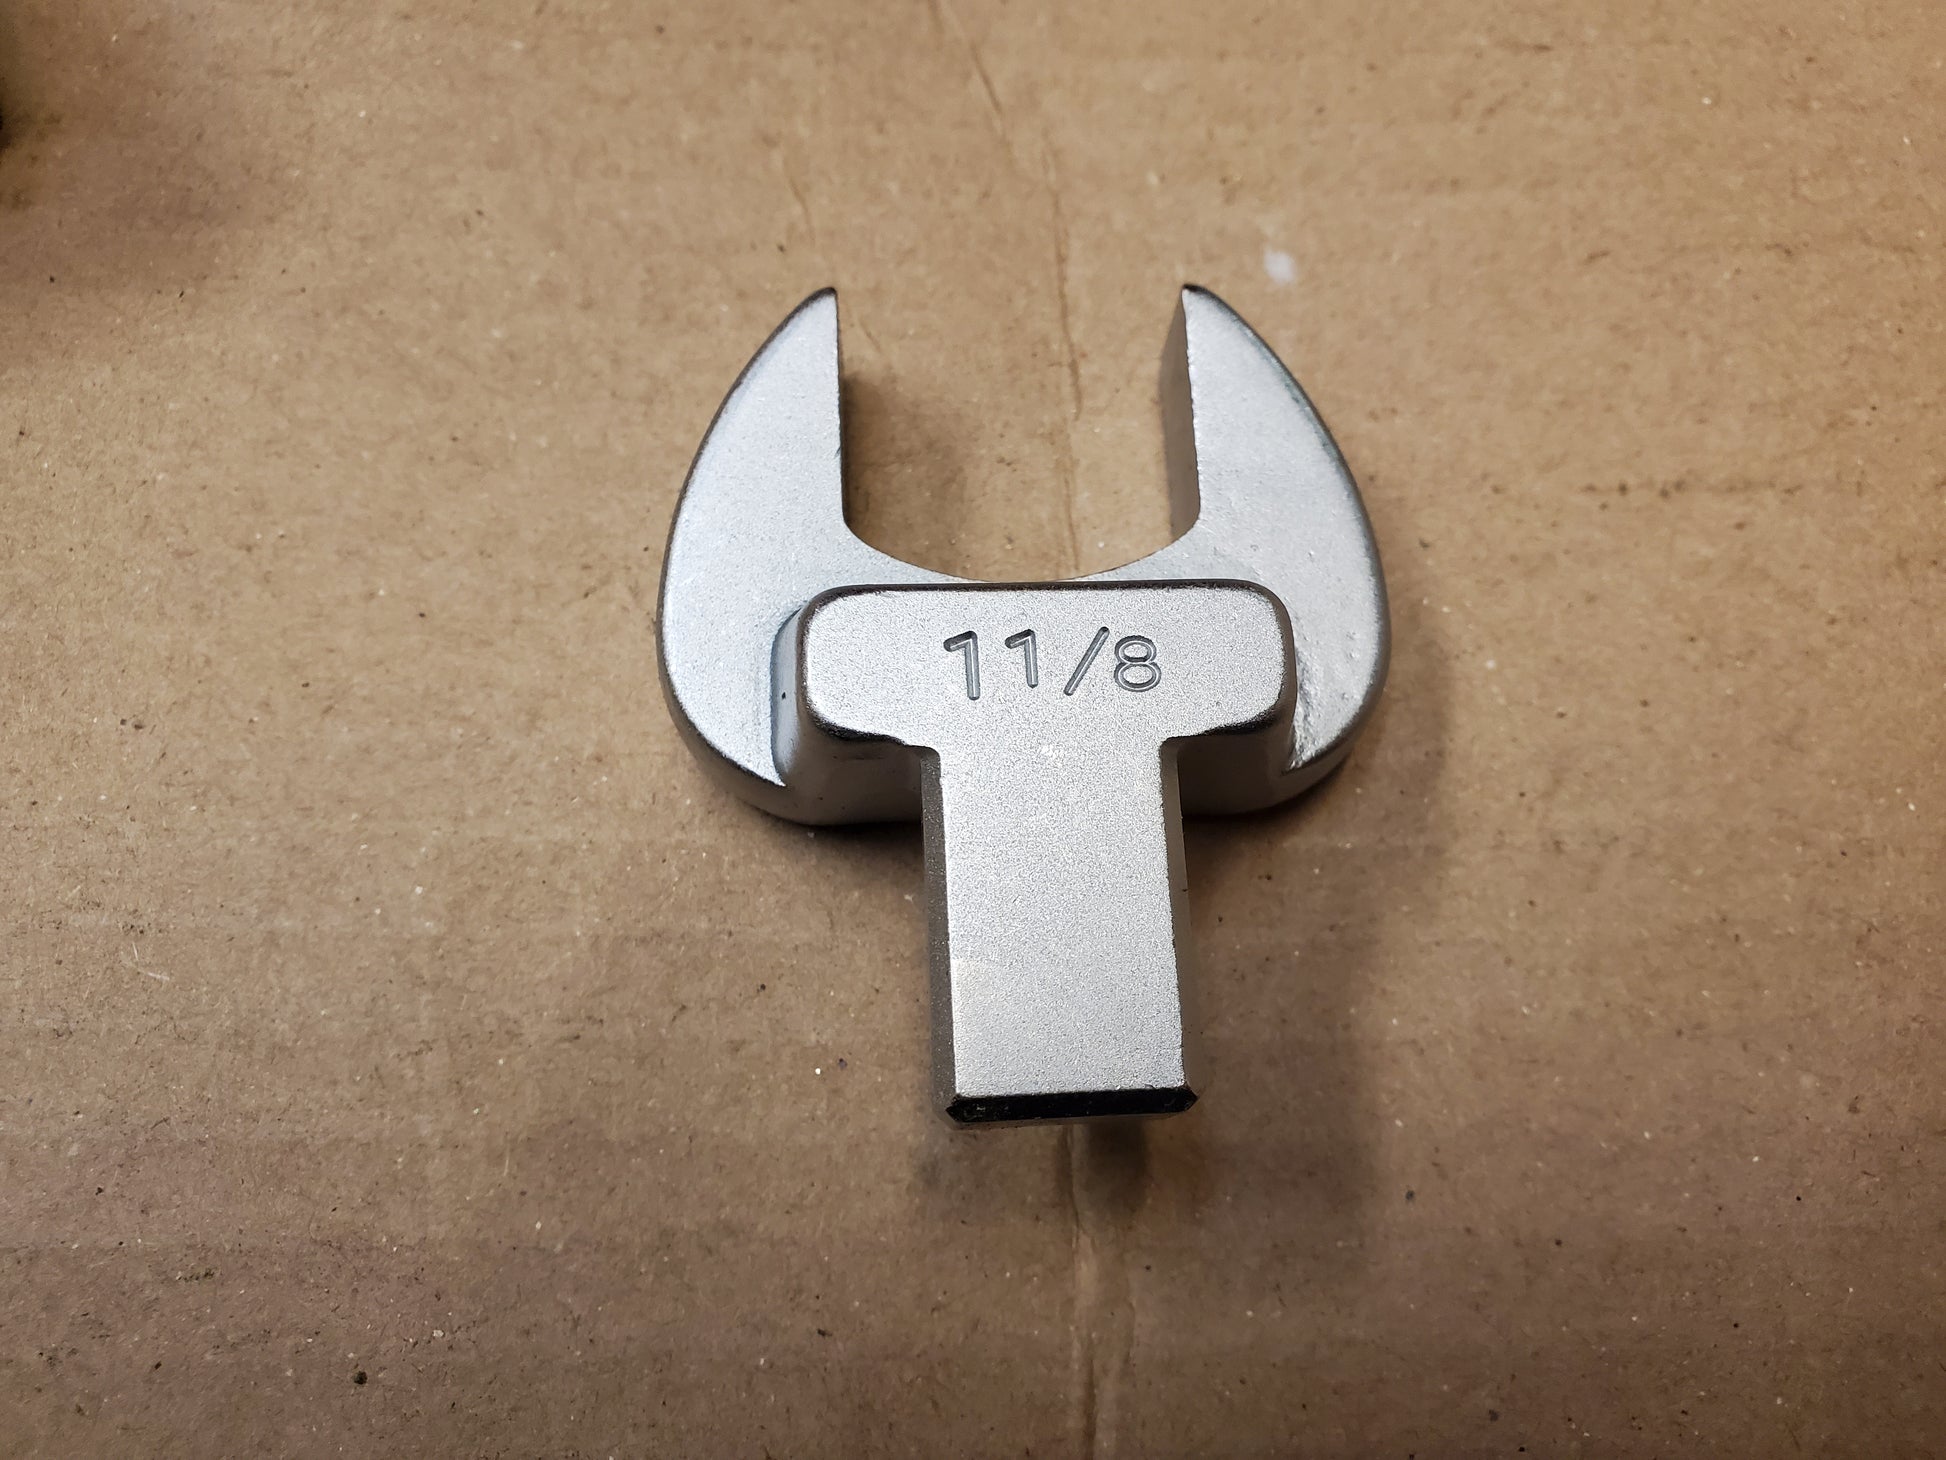 1-1/8" IMPERIAL SPANNER